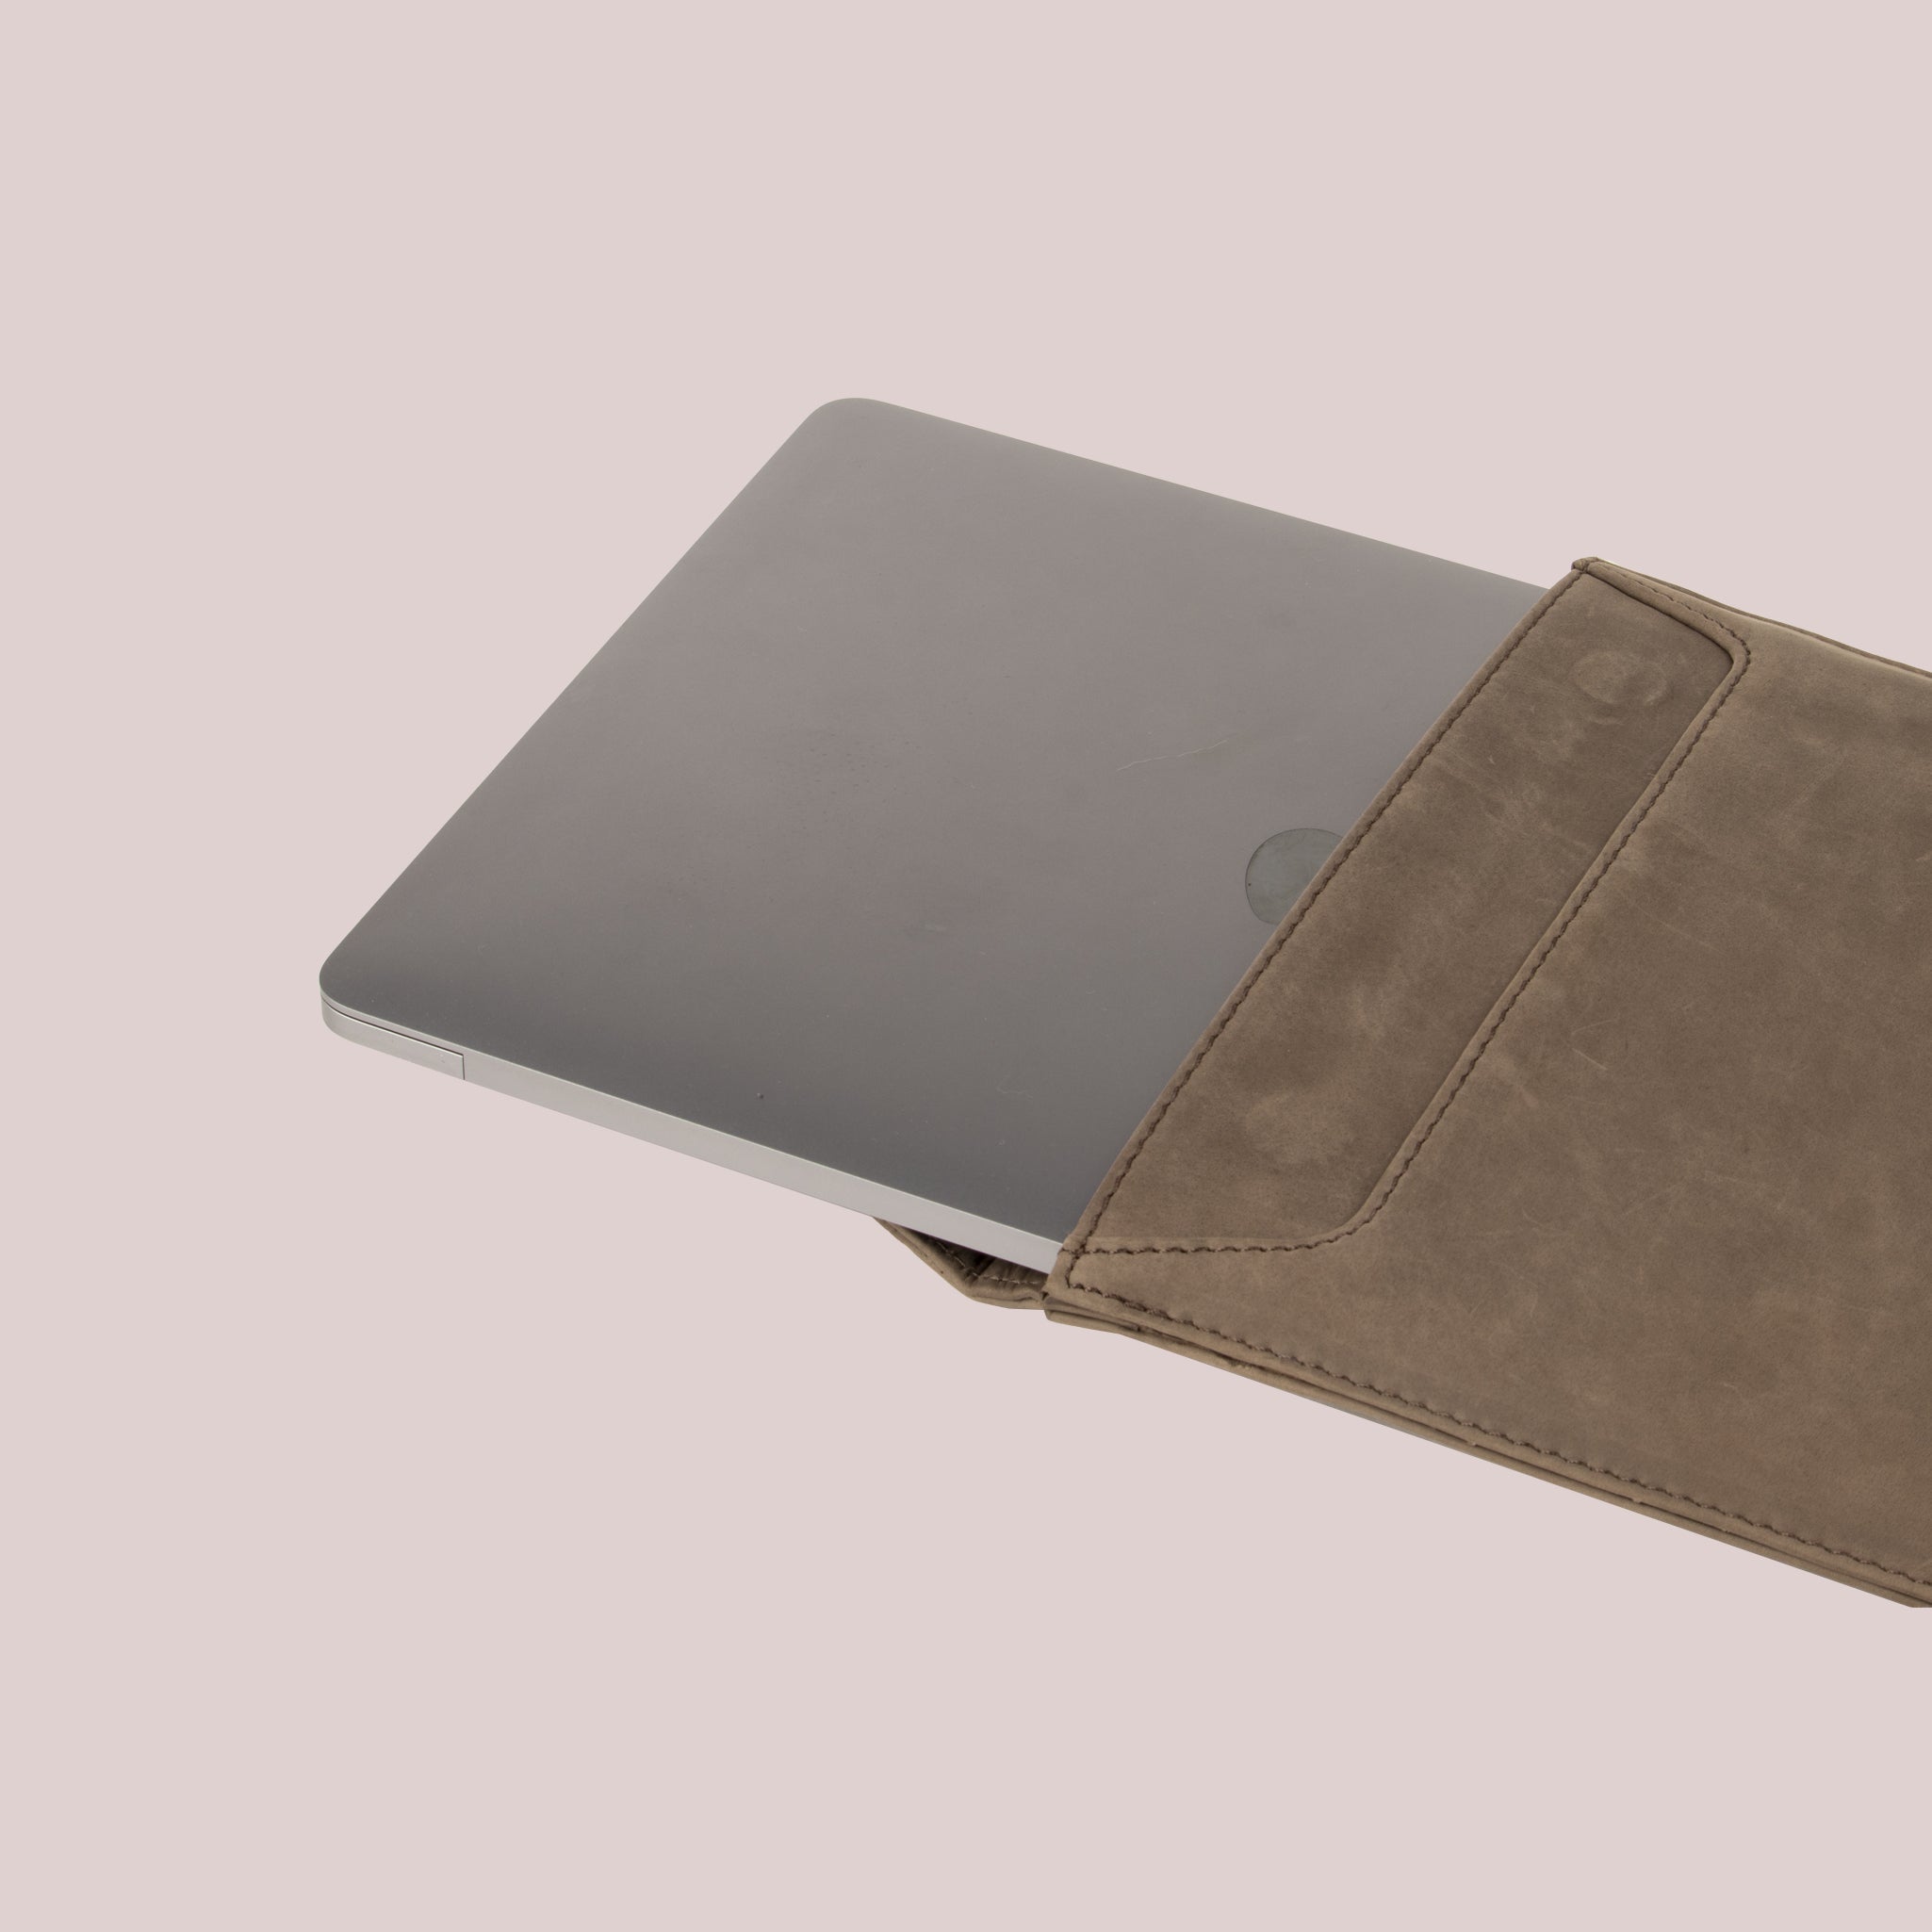 Buy Grey leather sleeve with a flap for Macbook laptops